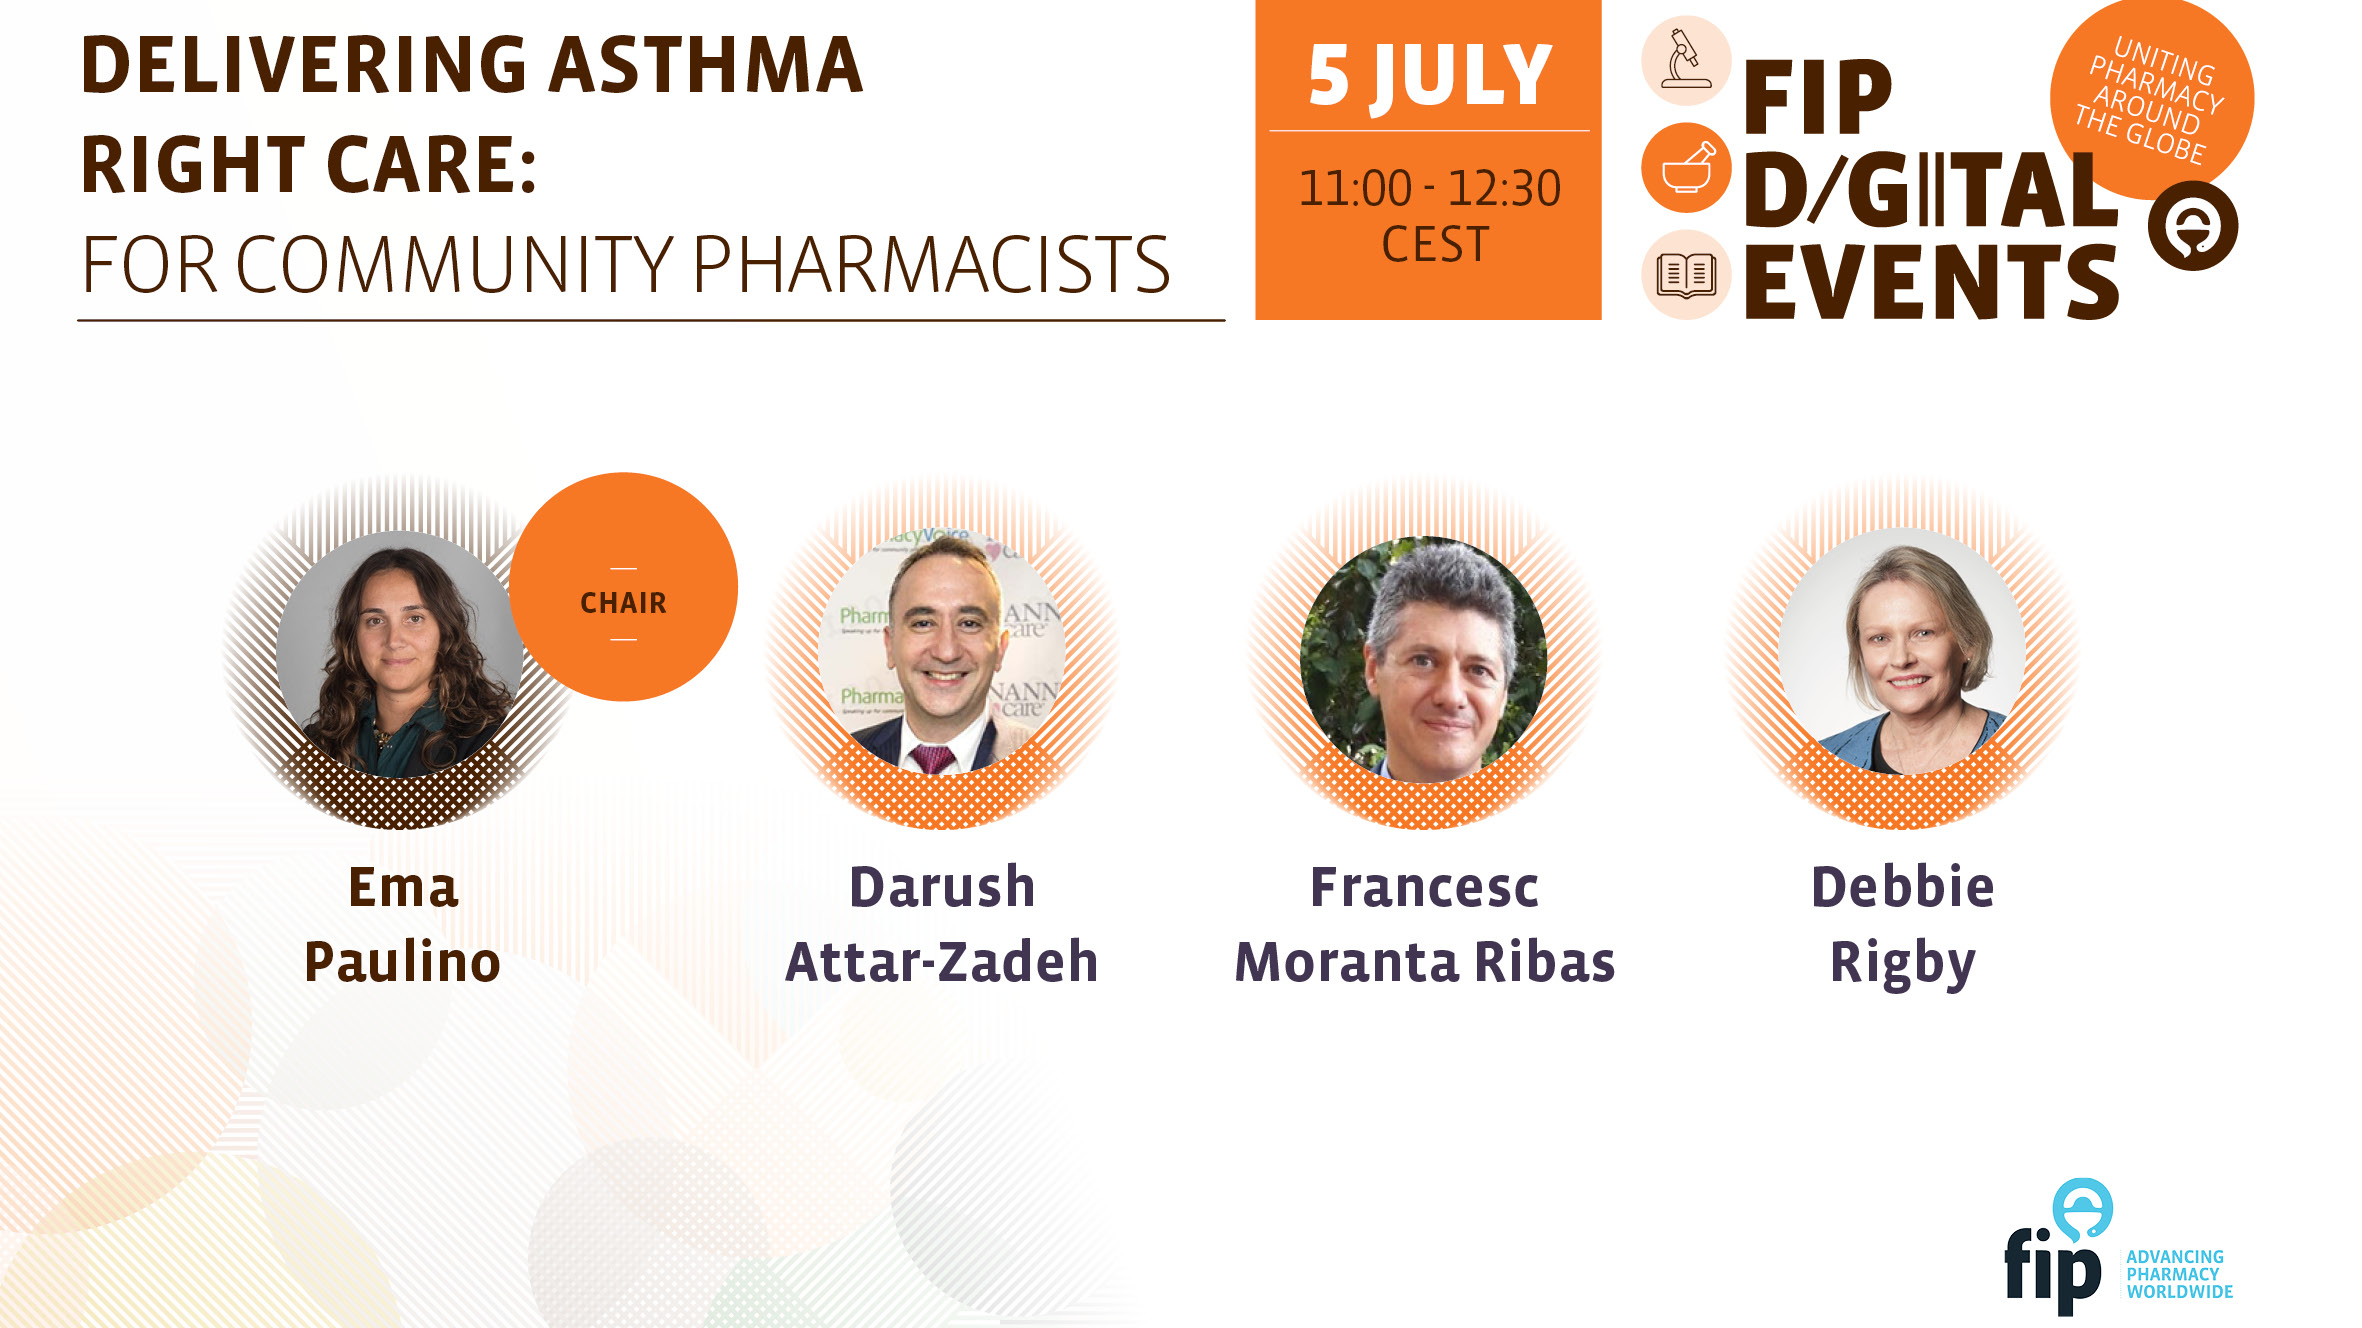 Delivering asthma right care: For community pharmacists Thumbnail